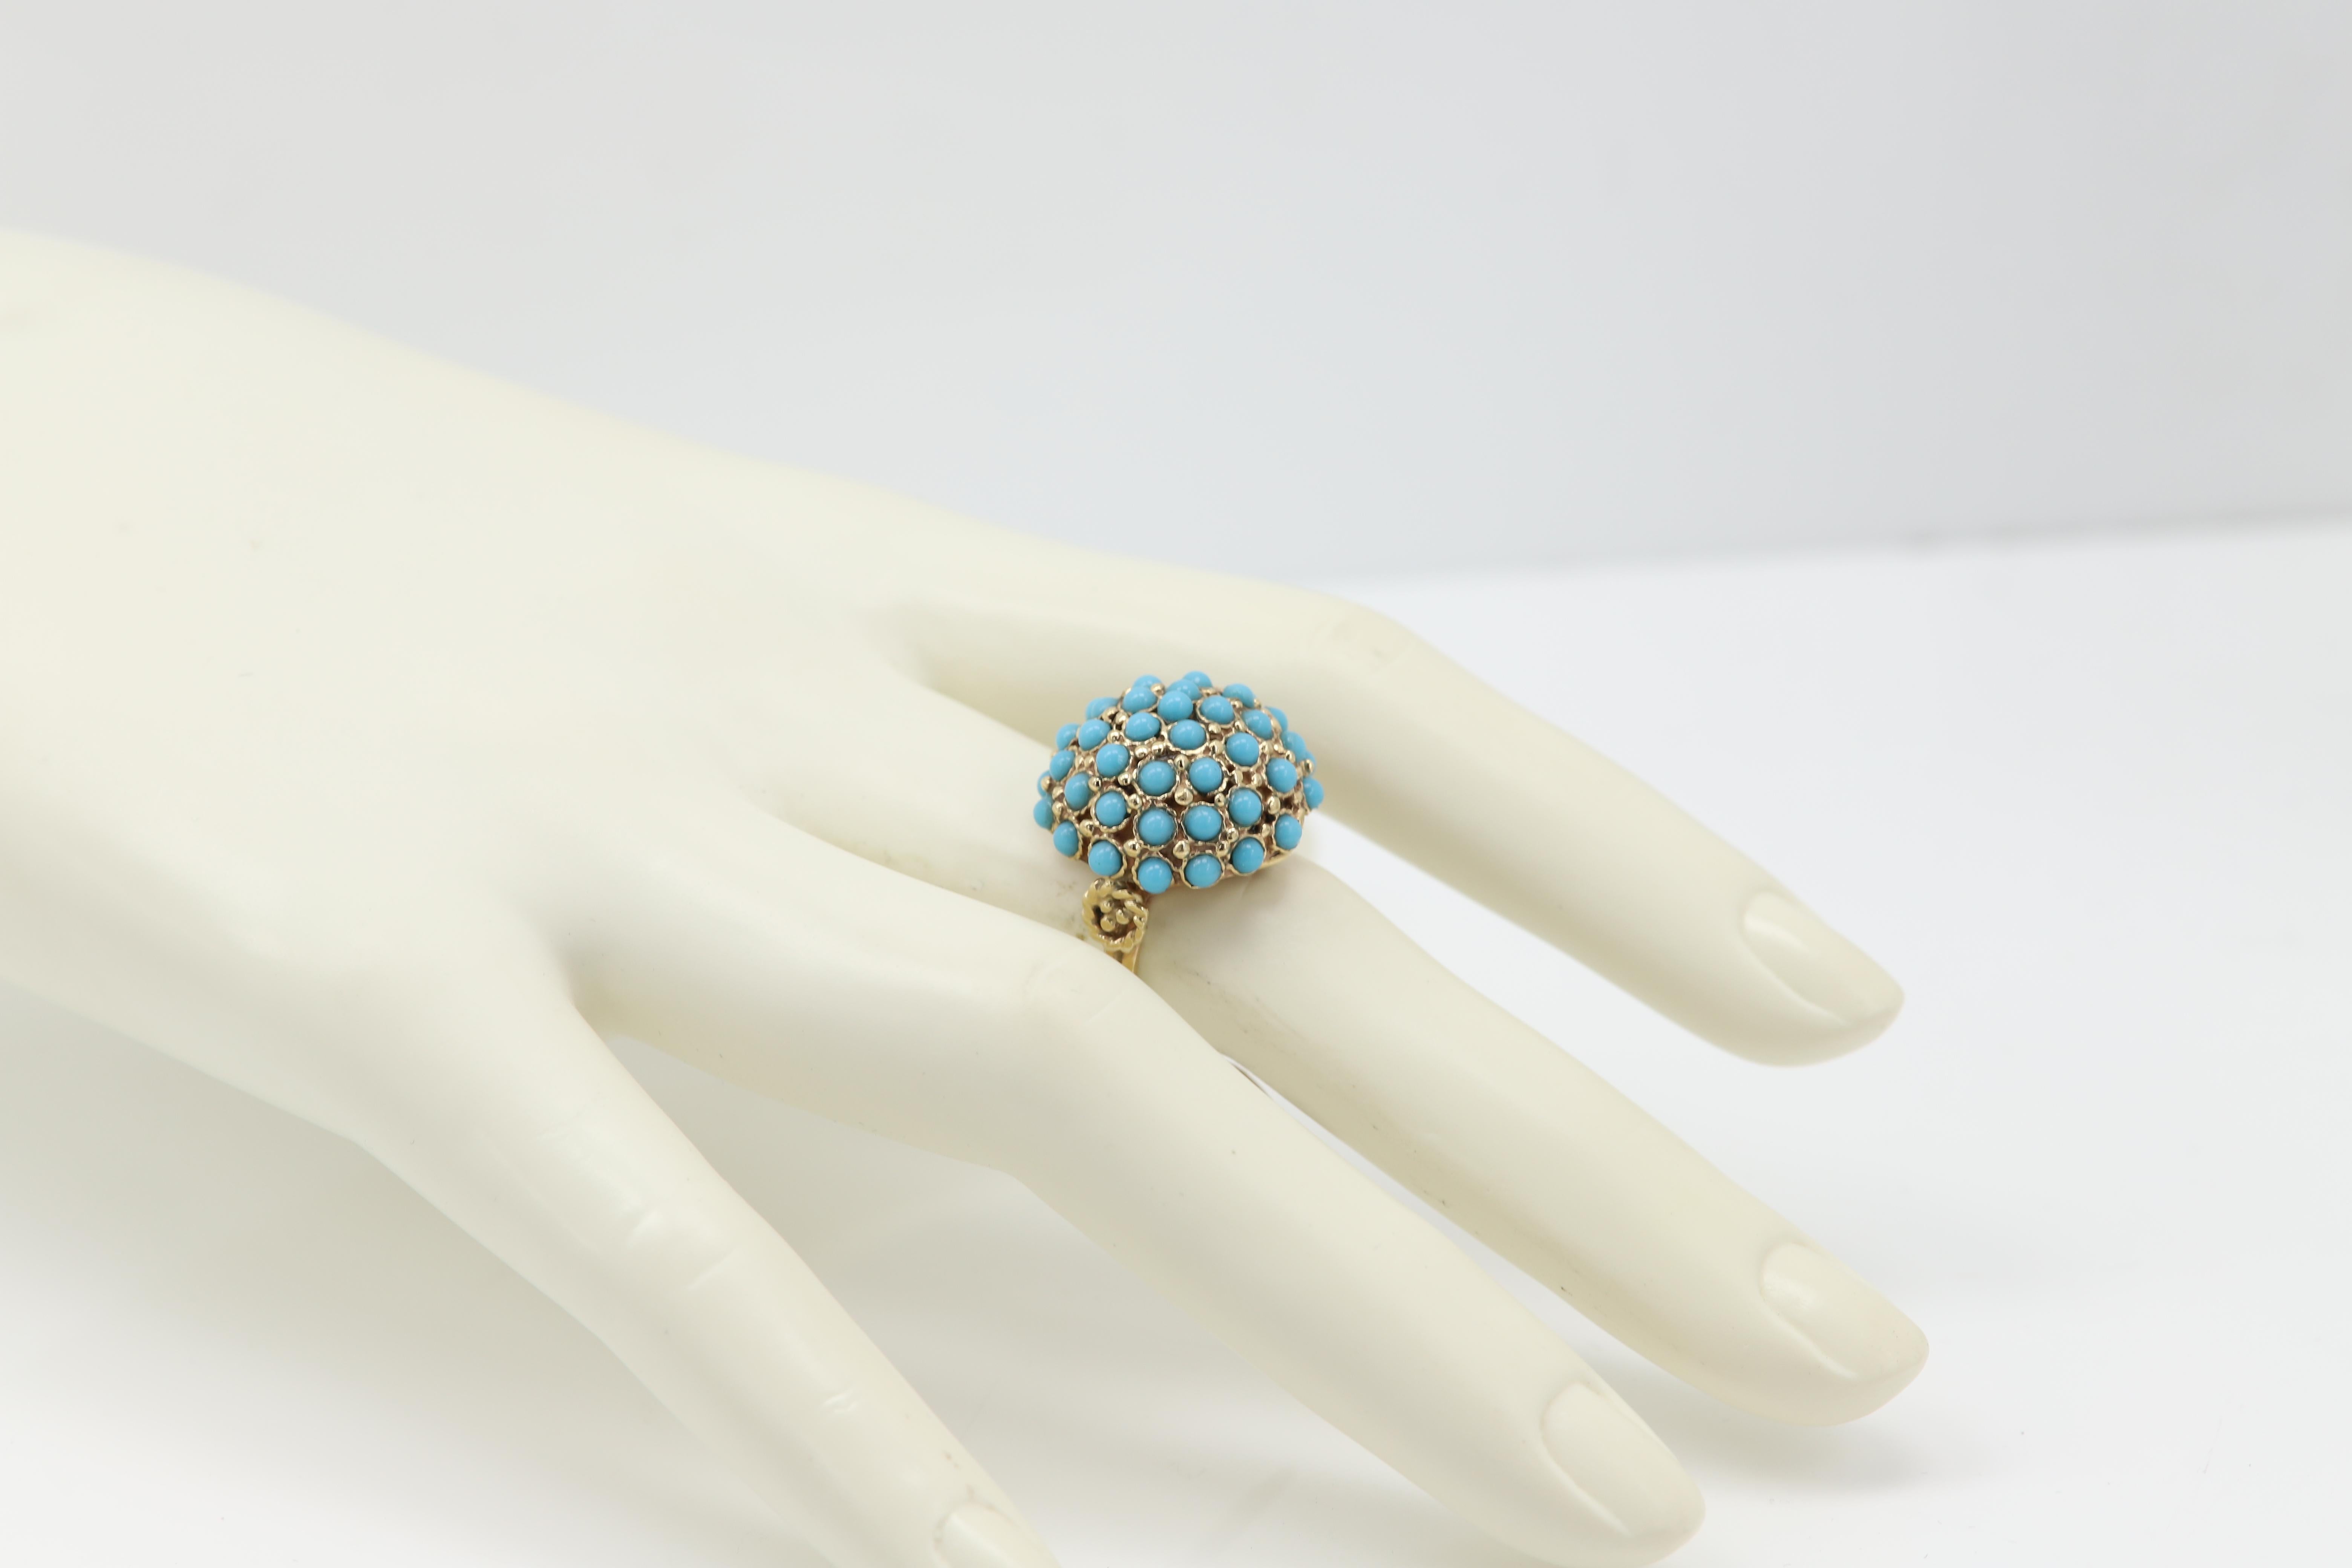 Antique Turquoise Ring 14 Karat Yellow Gold Cluster Design Persian Turquoise For Sale 2